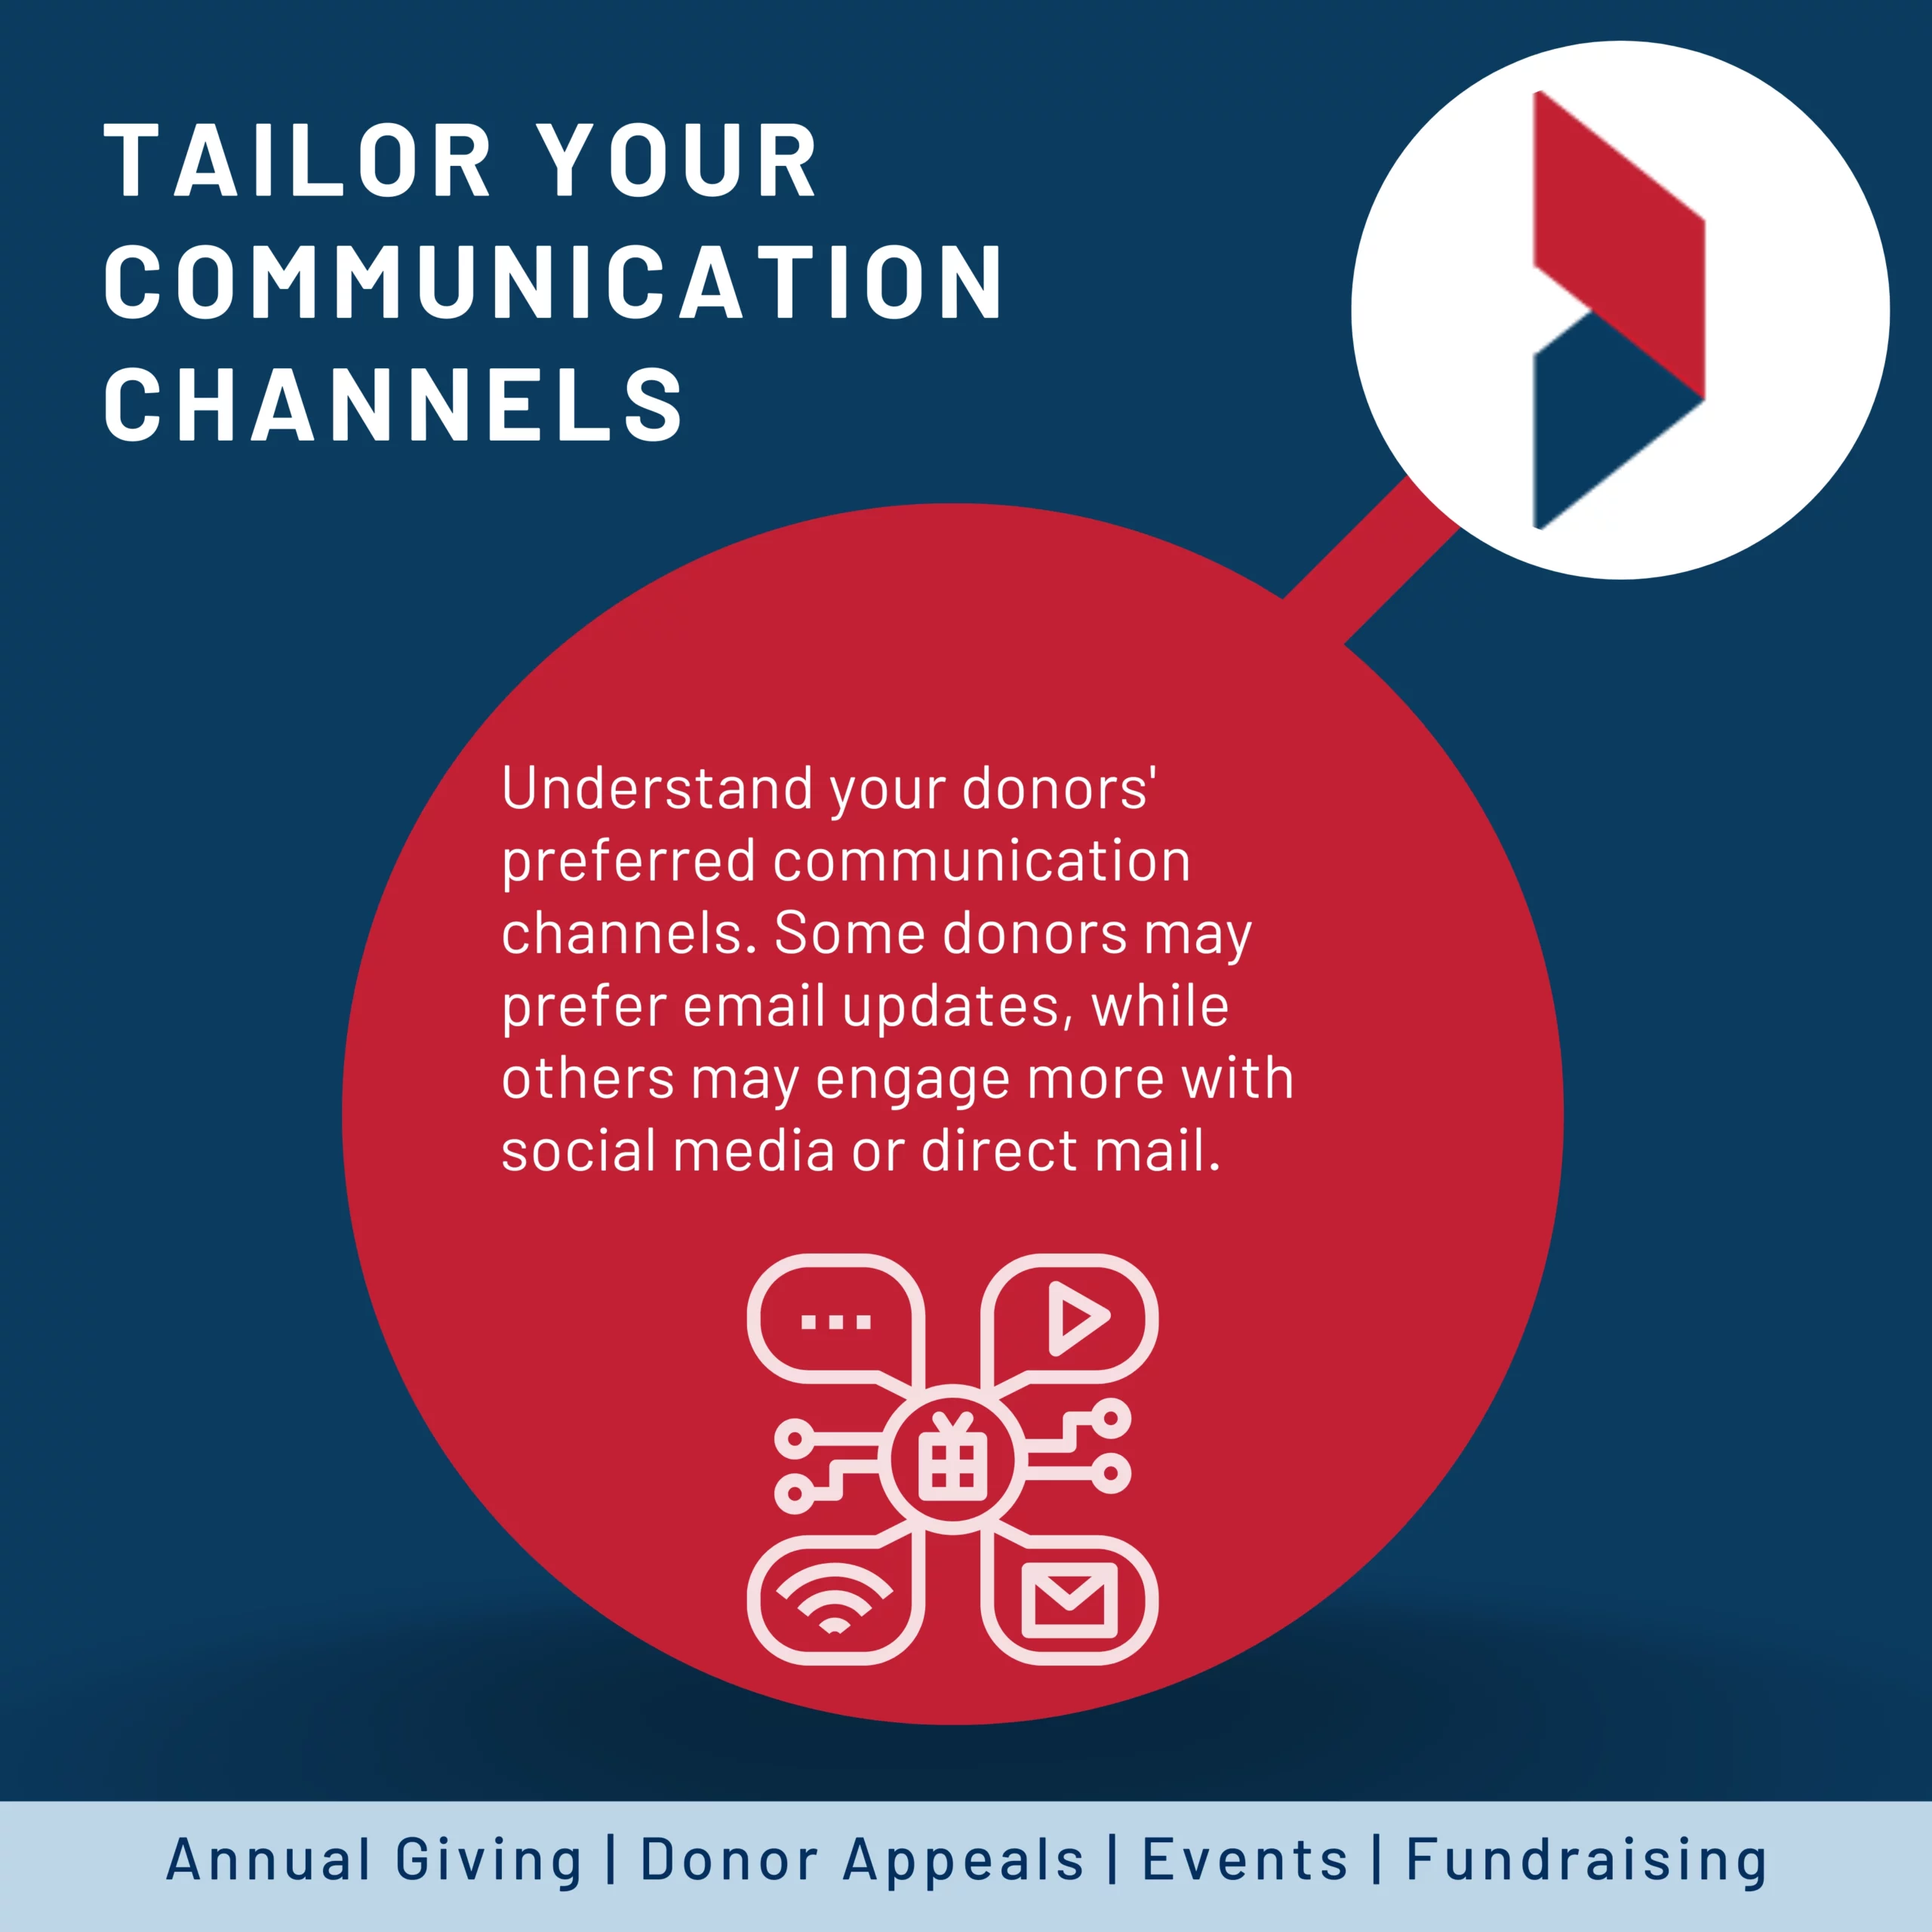 Tailor your communication channels: Understand your donors' preferred communication channels and use them effectively. Some donors may prefer email updates, while others may engage more with social media or direct mail. By using the right channels and delivering targeted messages, you can increase the chances of reaching and resonating with your donors.